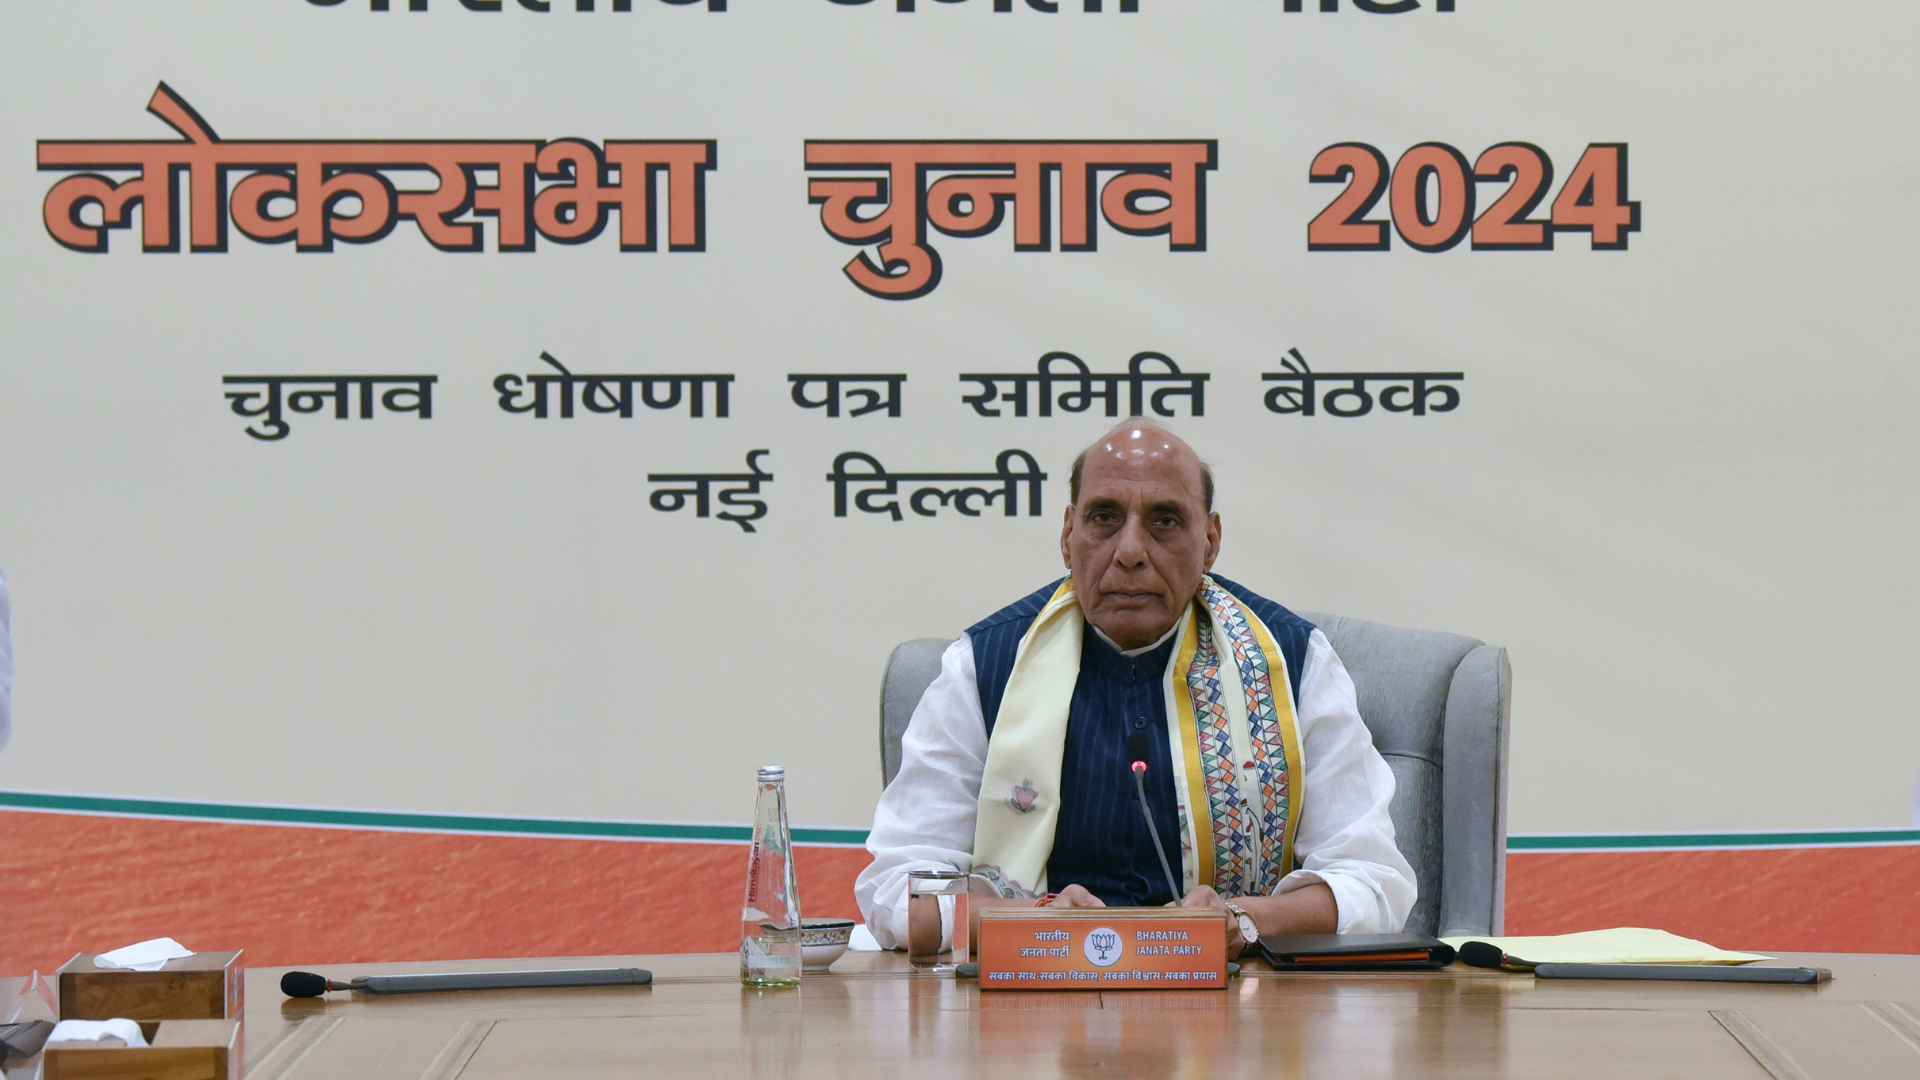 Rajnath Singh Scheduled To Engage With Indian Armed Forces In Siachen Tomorrow